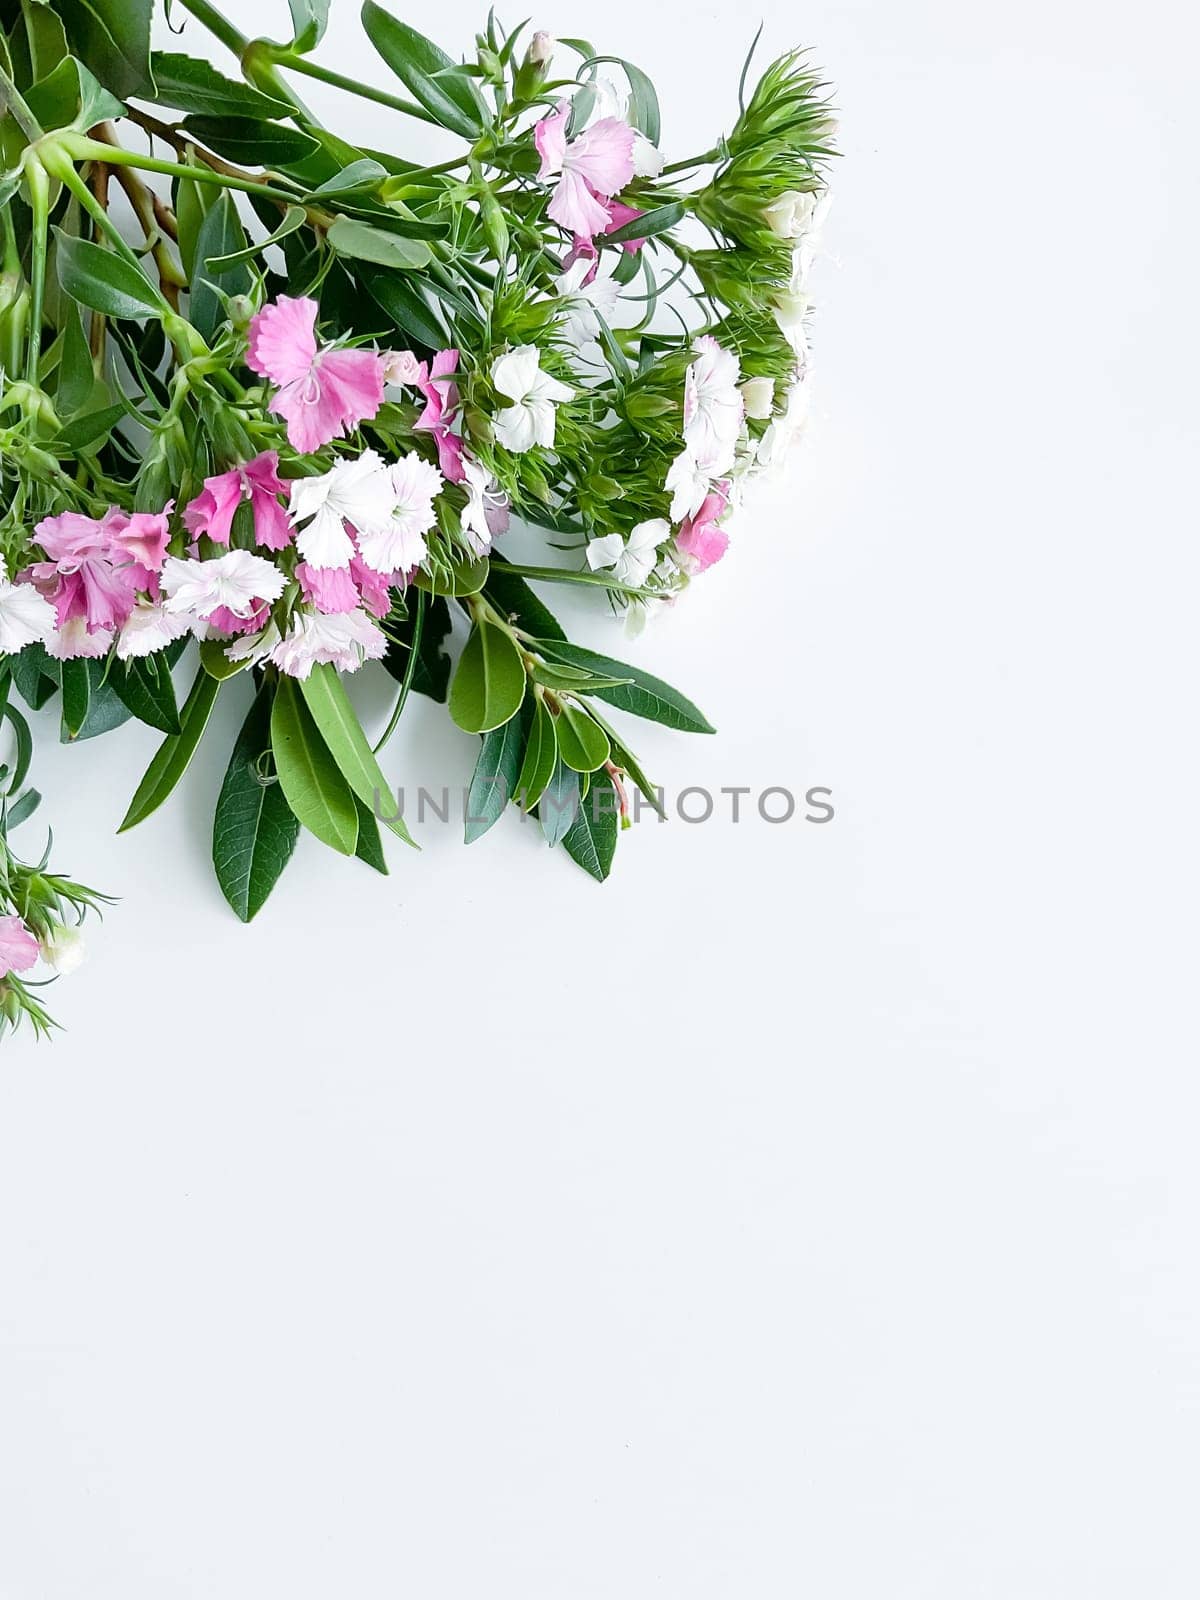 japanese dianthus and laurel leaves. floral frame with empty space for text or inscription. spring postcard